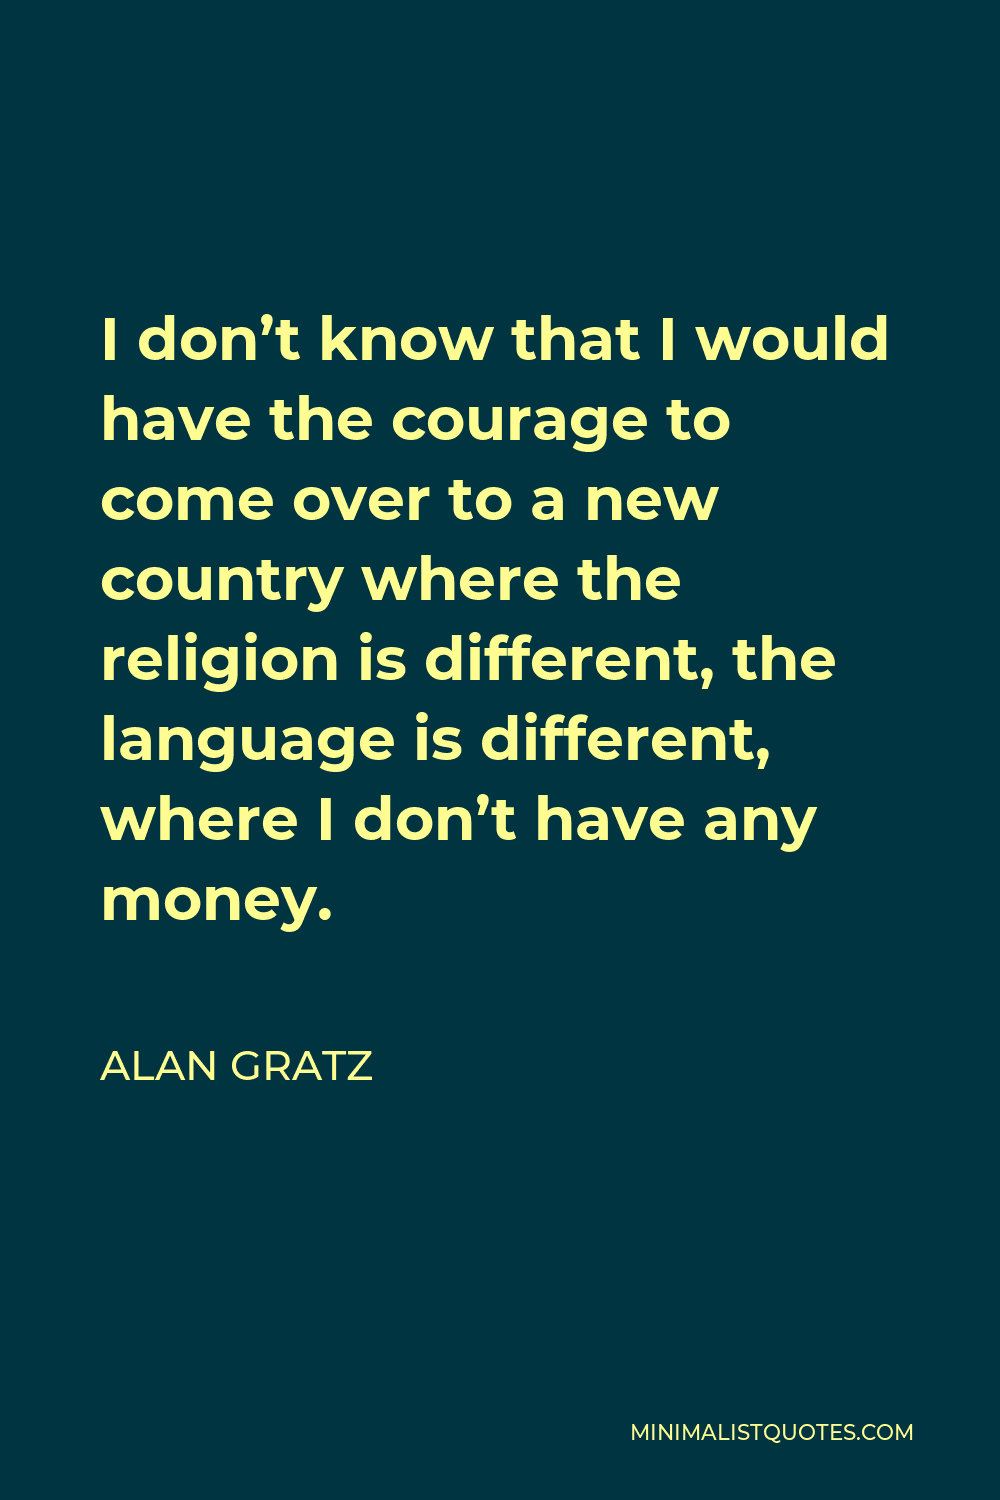 Alan Gratz Quote - I don’t know that I would have the courage to come over to a new country where the religion is different, the language is different, where I don’t have any money.